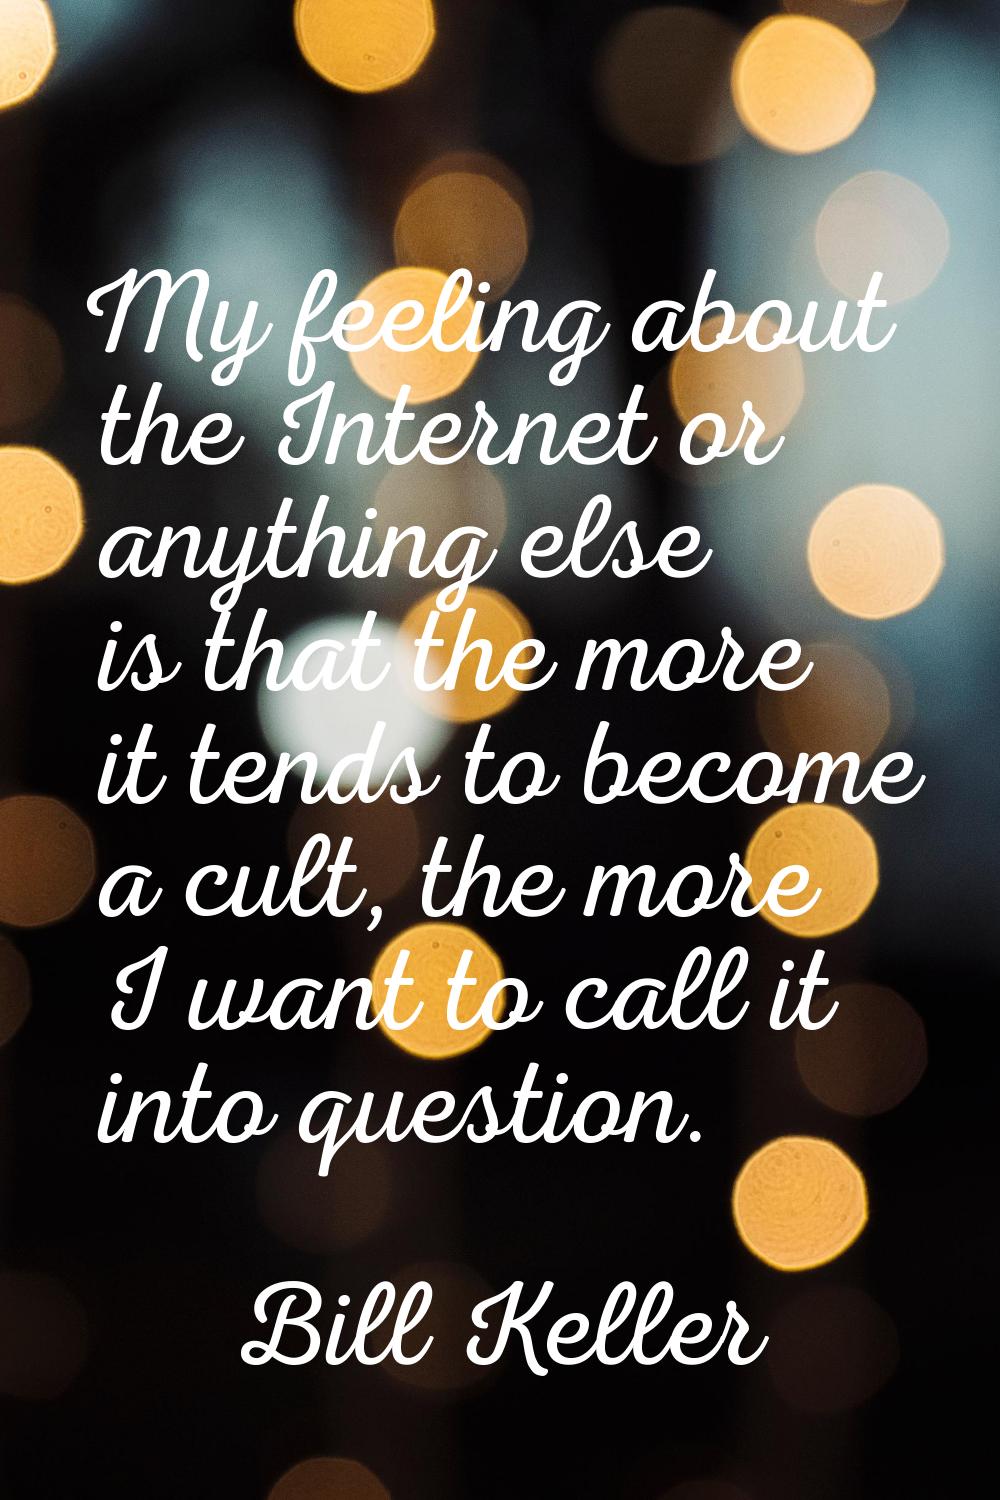 My feeling about the Internet or anything else is that the more it tends to become a cult, the more